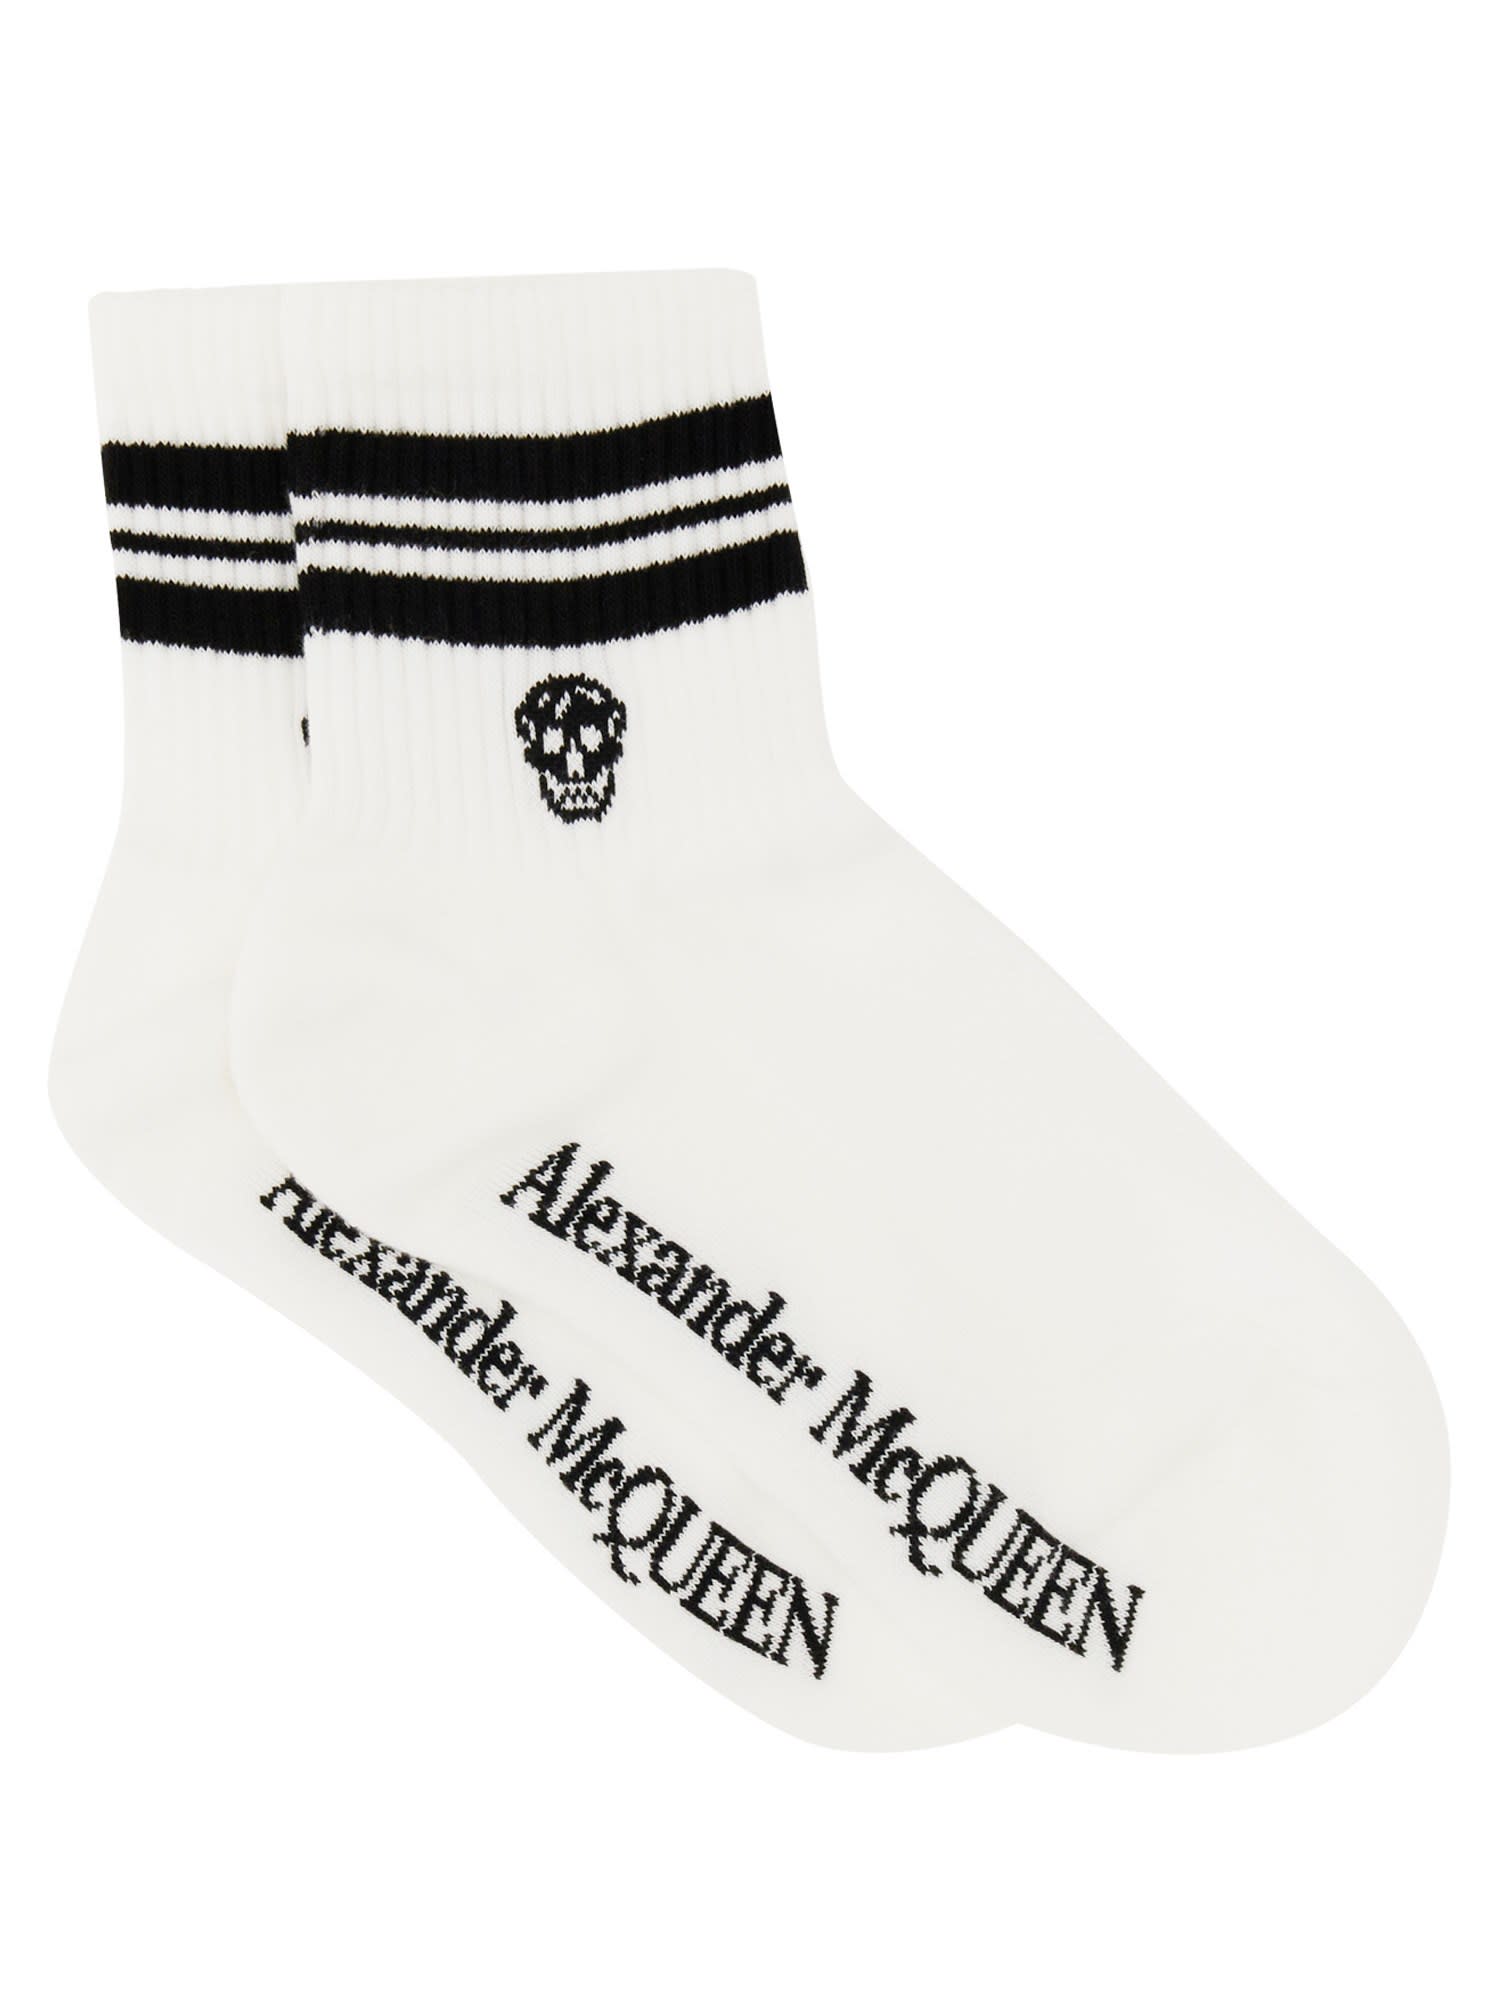 Black And White Socks With Skull And Stripes